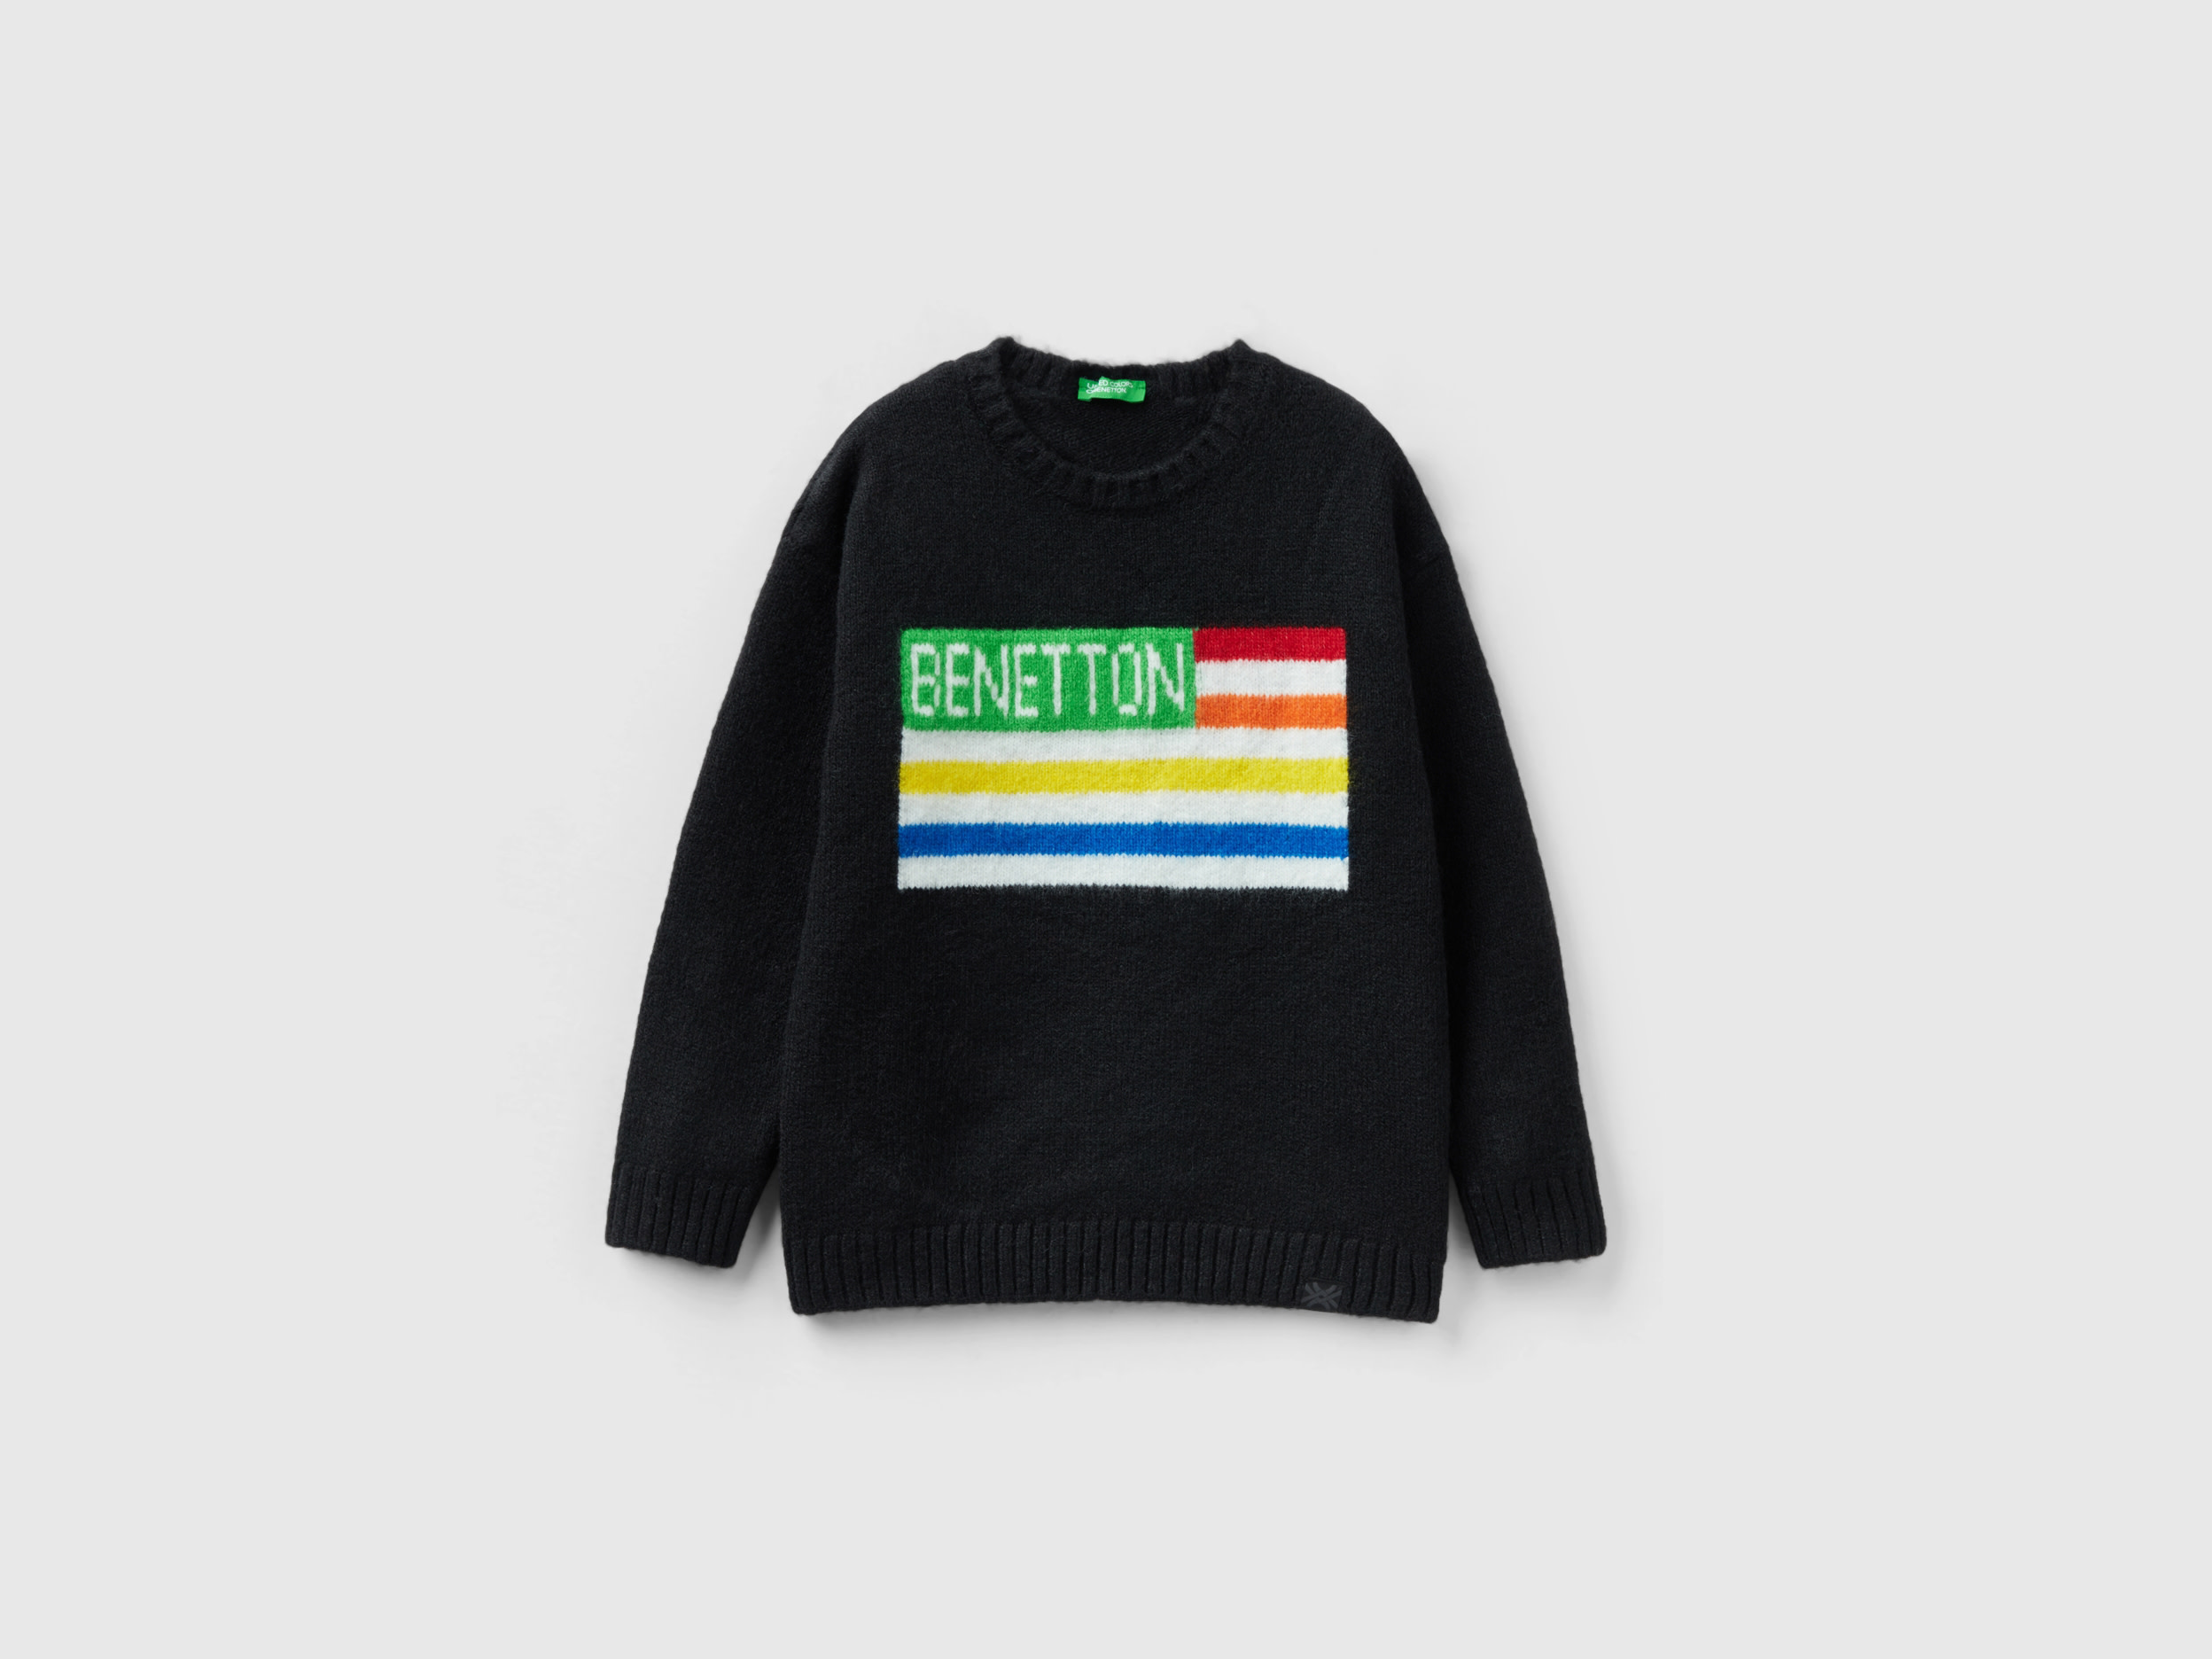 Benetton, Sweater With Flag Inlay, size 2XL, Black, Kids